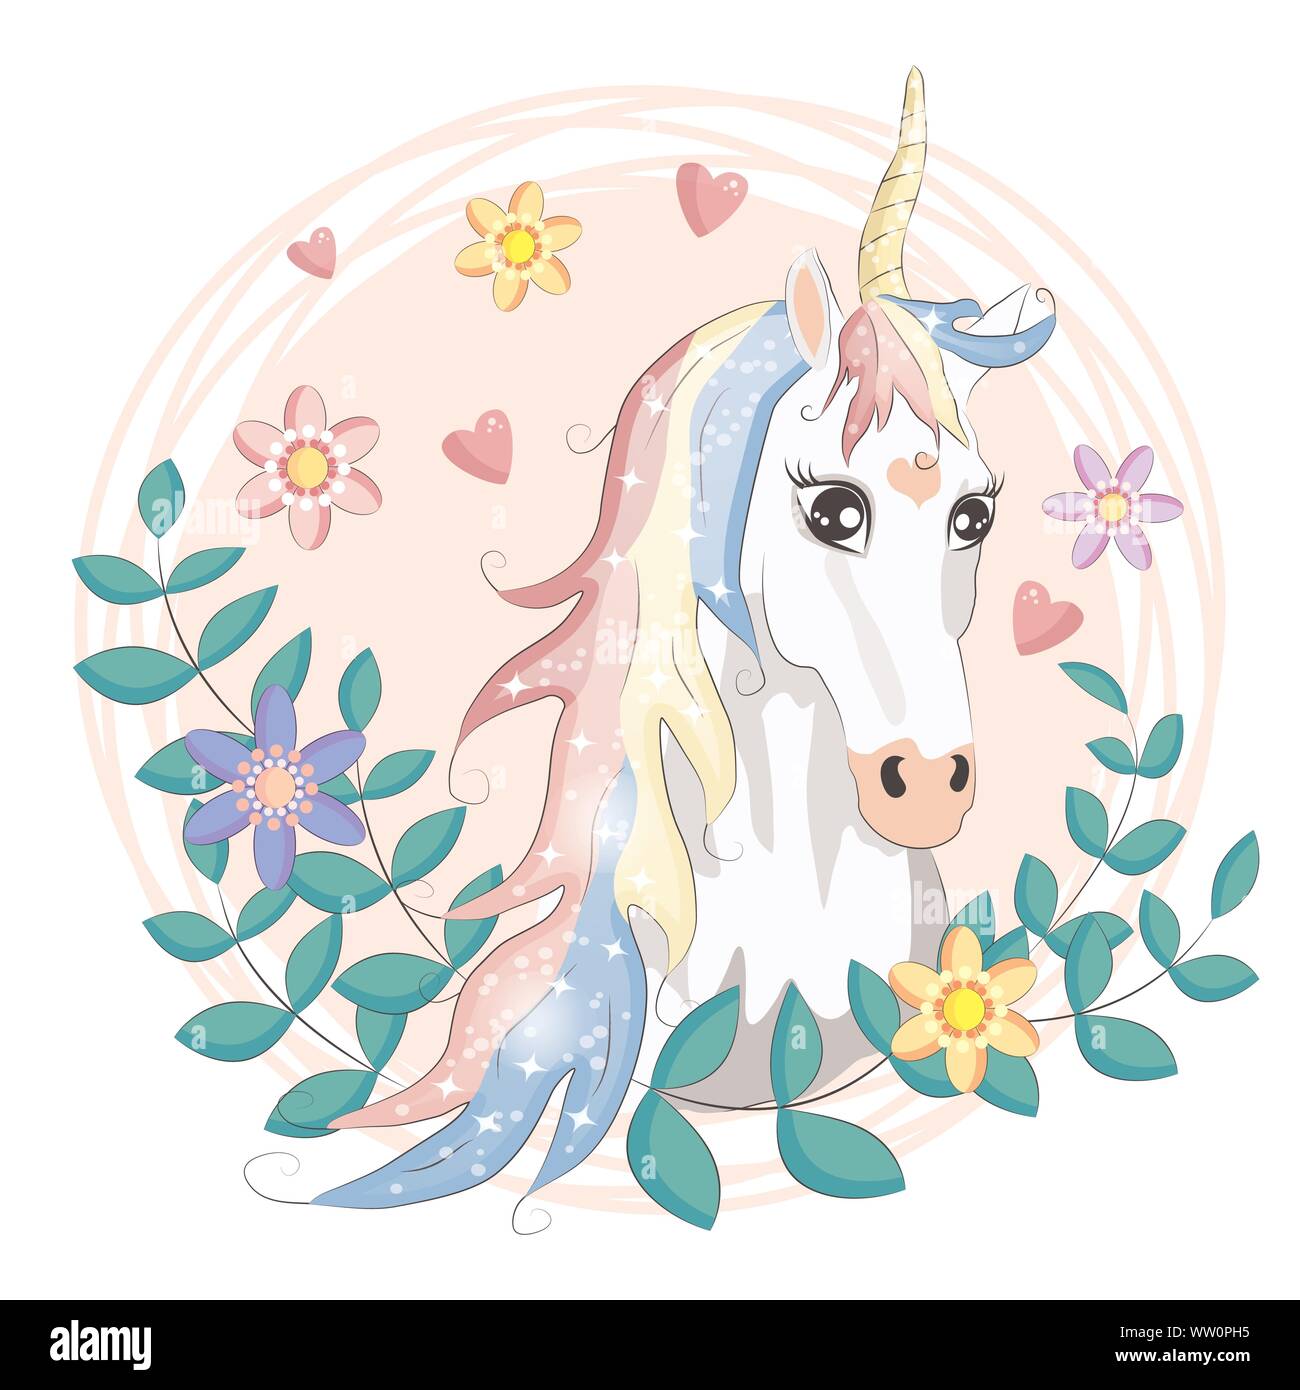 Cute Cartoon Unicorn With Flowers On A Pink Background Stock